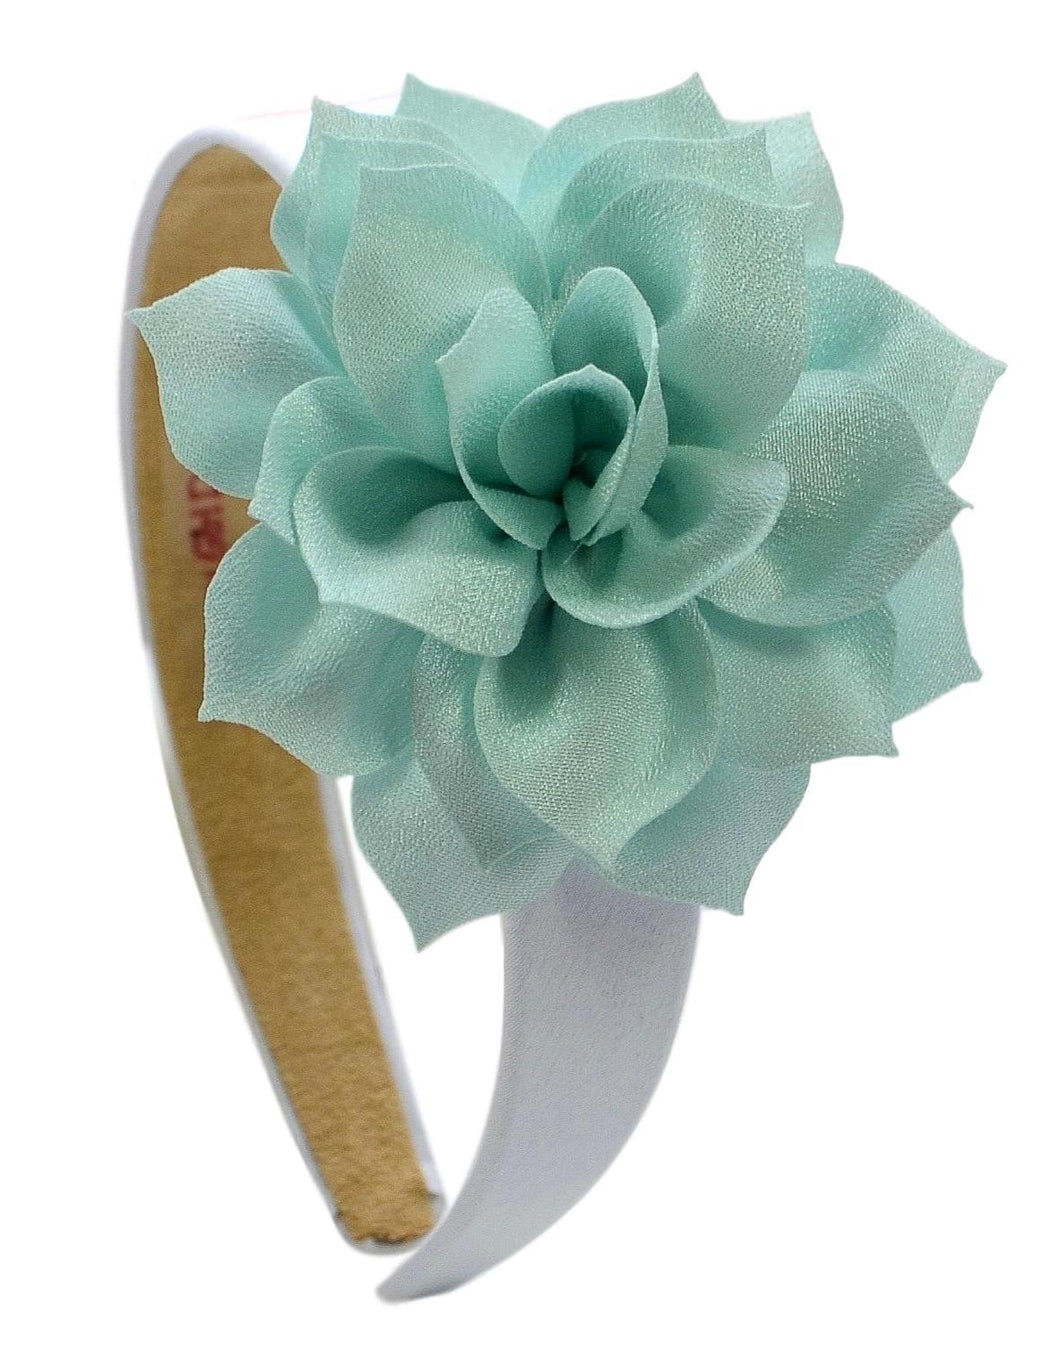 Tropical Flower Arch Headbands - 9 Colors!